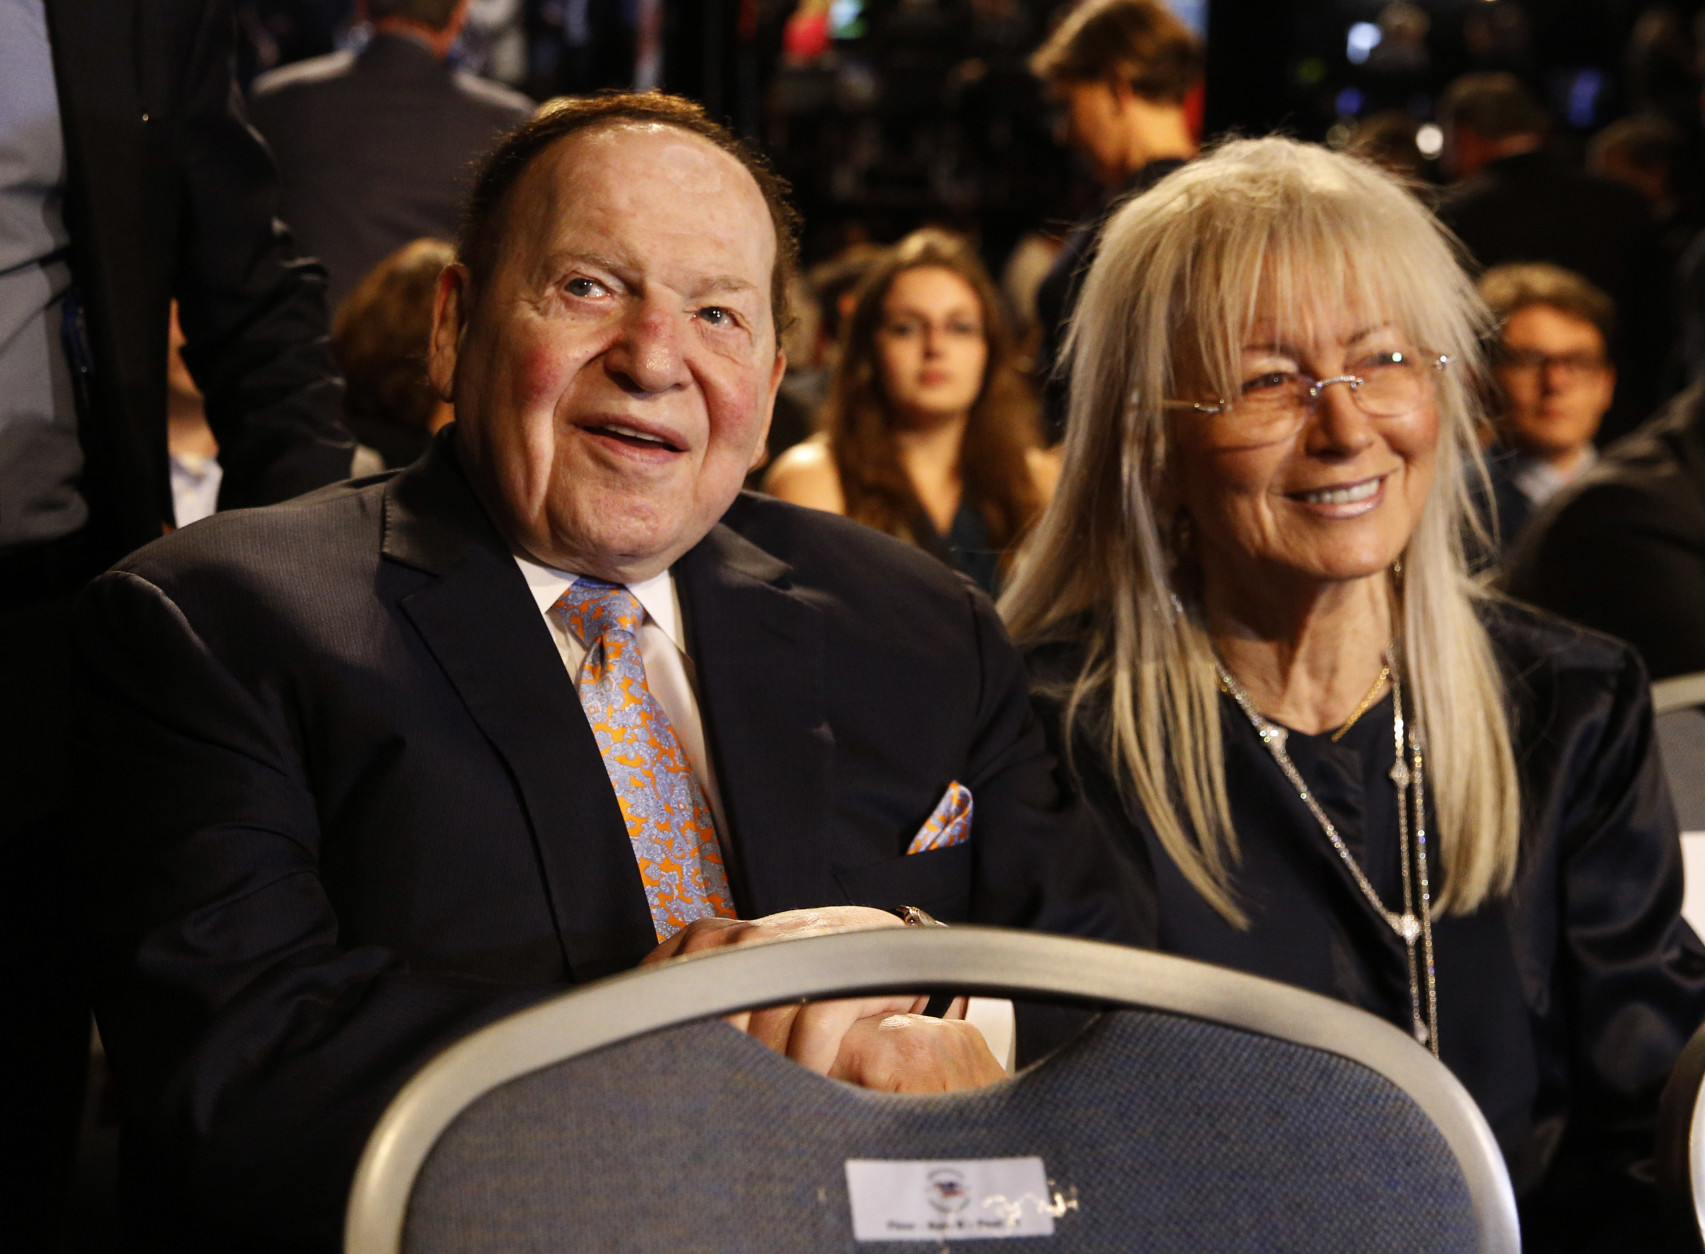 Chief Executive of Las Vegas Sands Corporation Sheldon Adelson sits with his wife Miriam waits for the presidential debate between Democratic presidential nominee Hillary Clinton and Republican presidential nominee Donald Trump at Hofstra University in Hempstead, N.Y., Monday, Sept. 26, 2016. (AP Photo/Patrick Semansky)